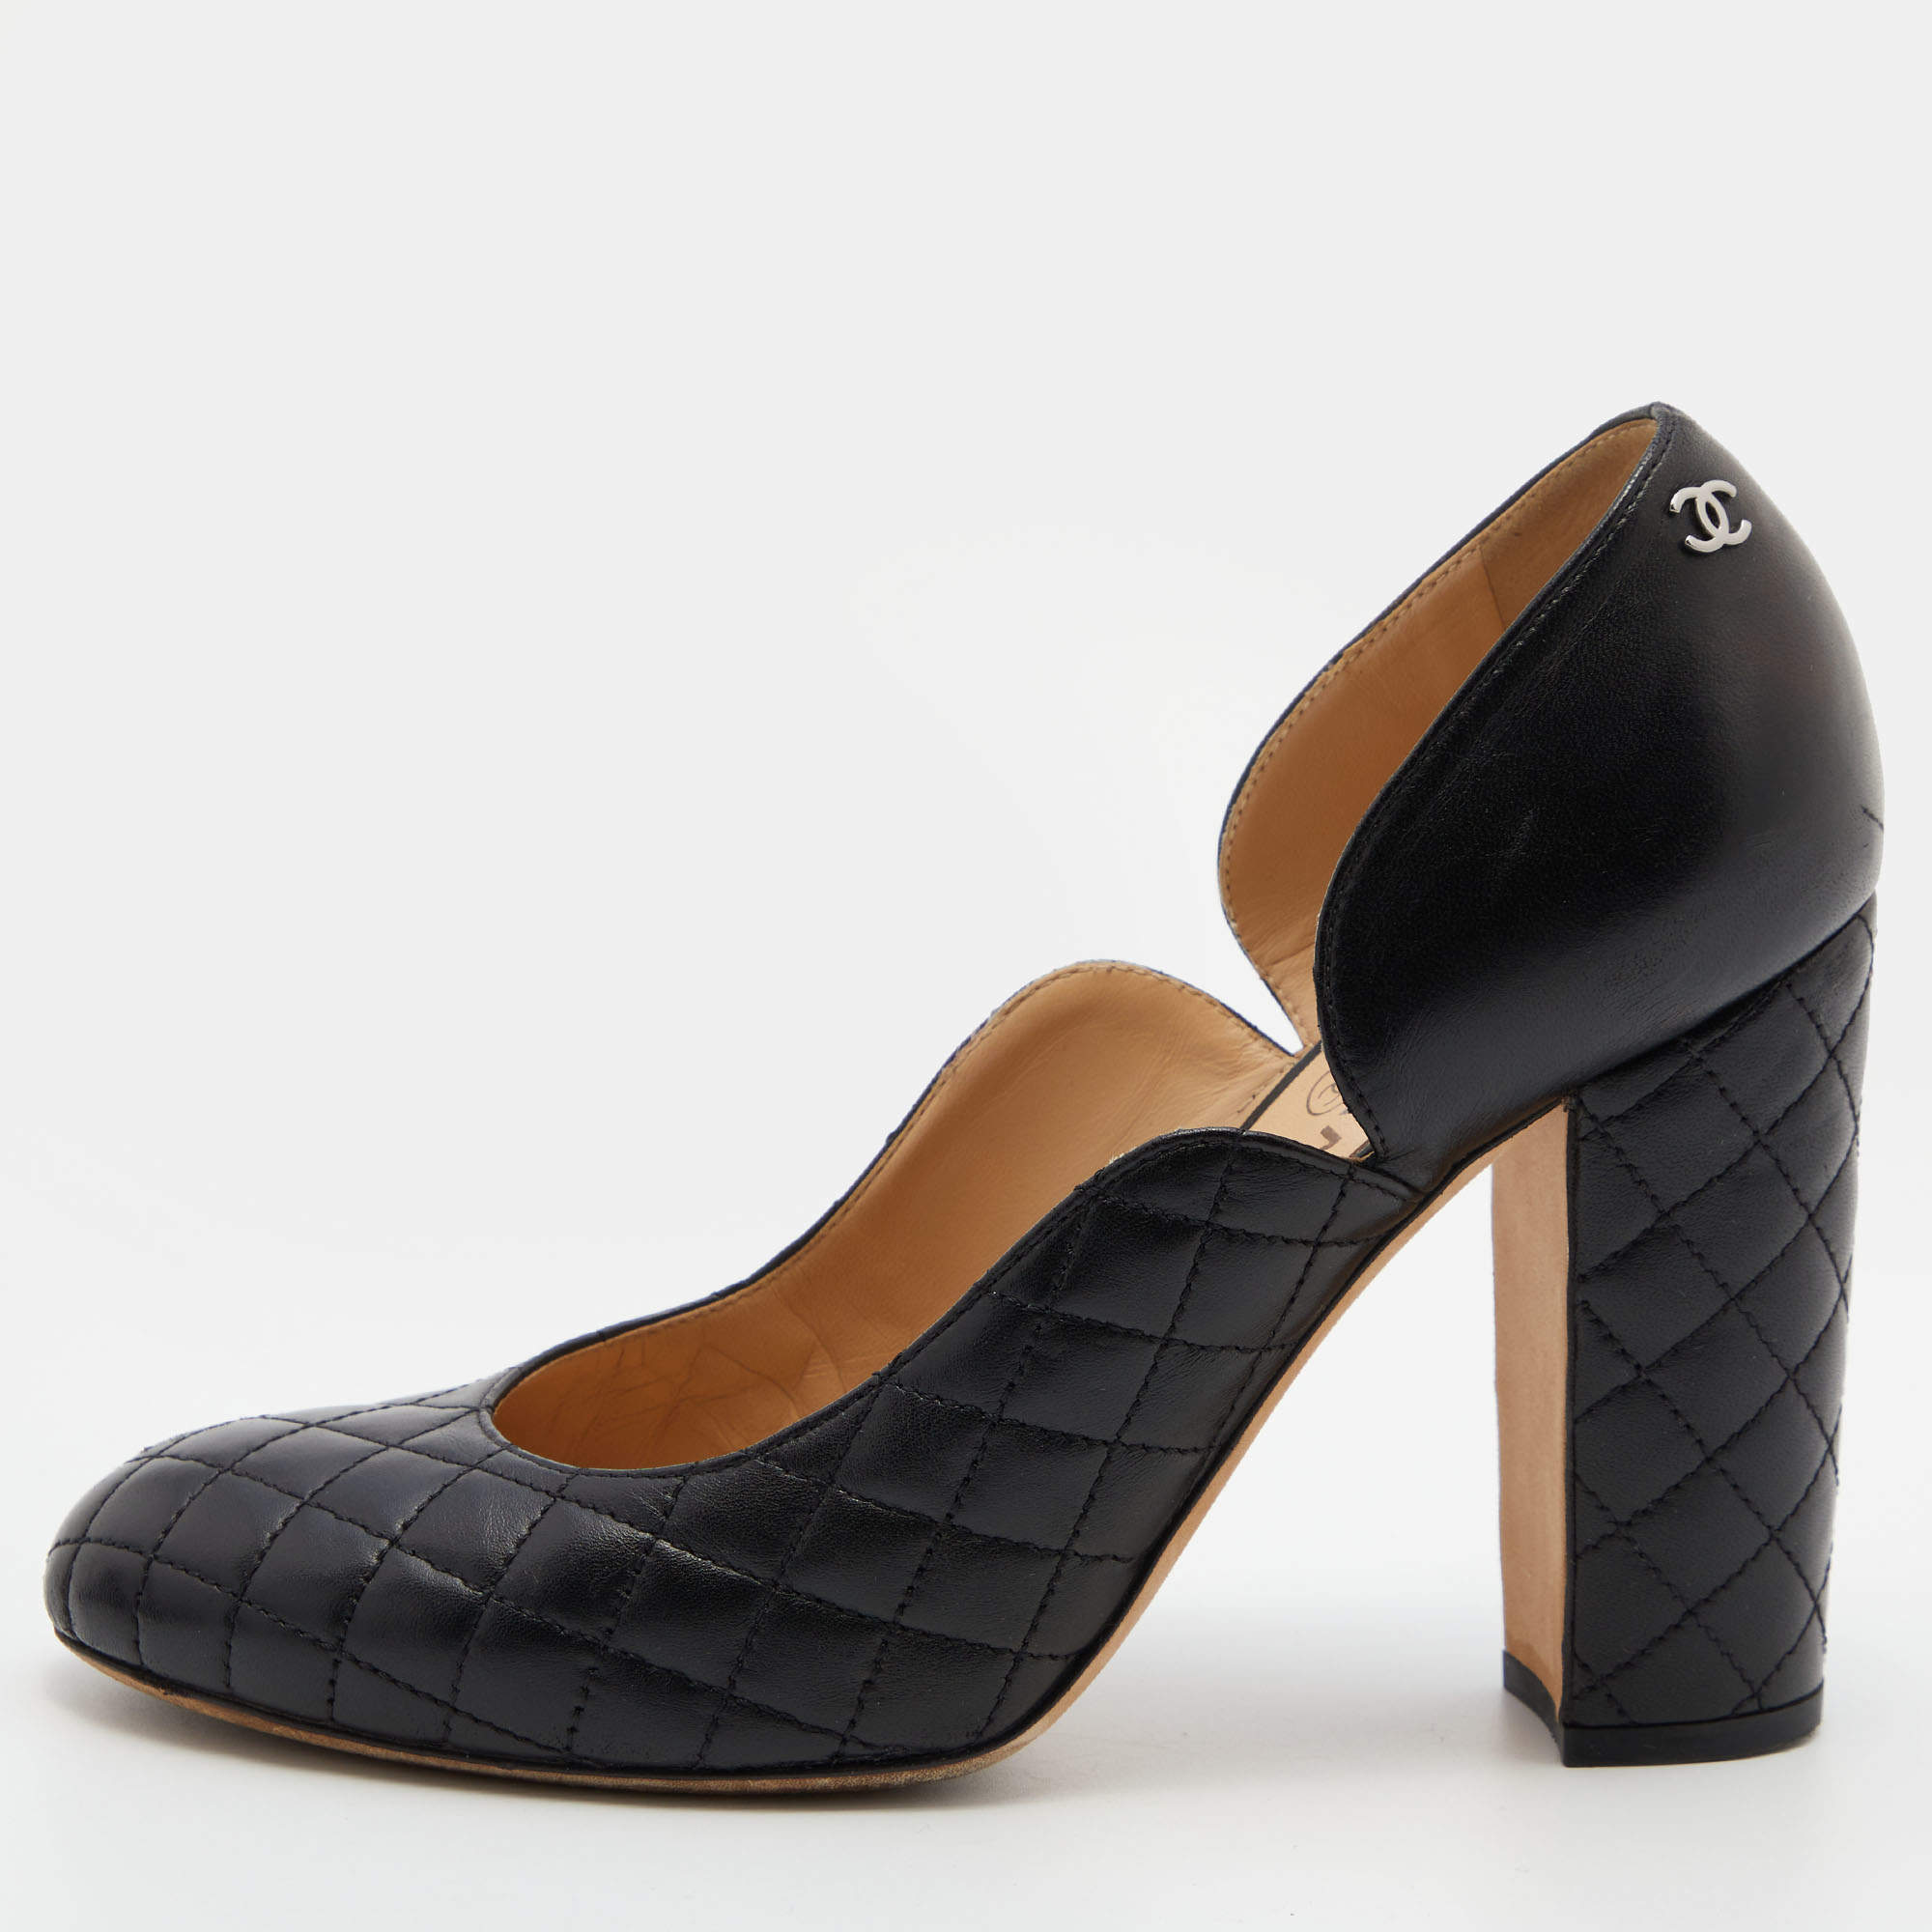 Chanel Black Quilted Leather Round Toe Block Heel Pumps Size 39.5